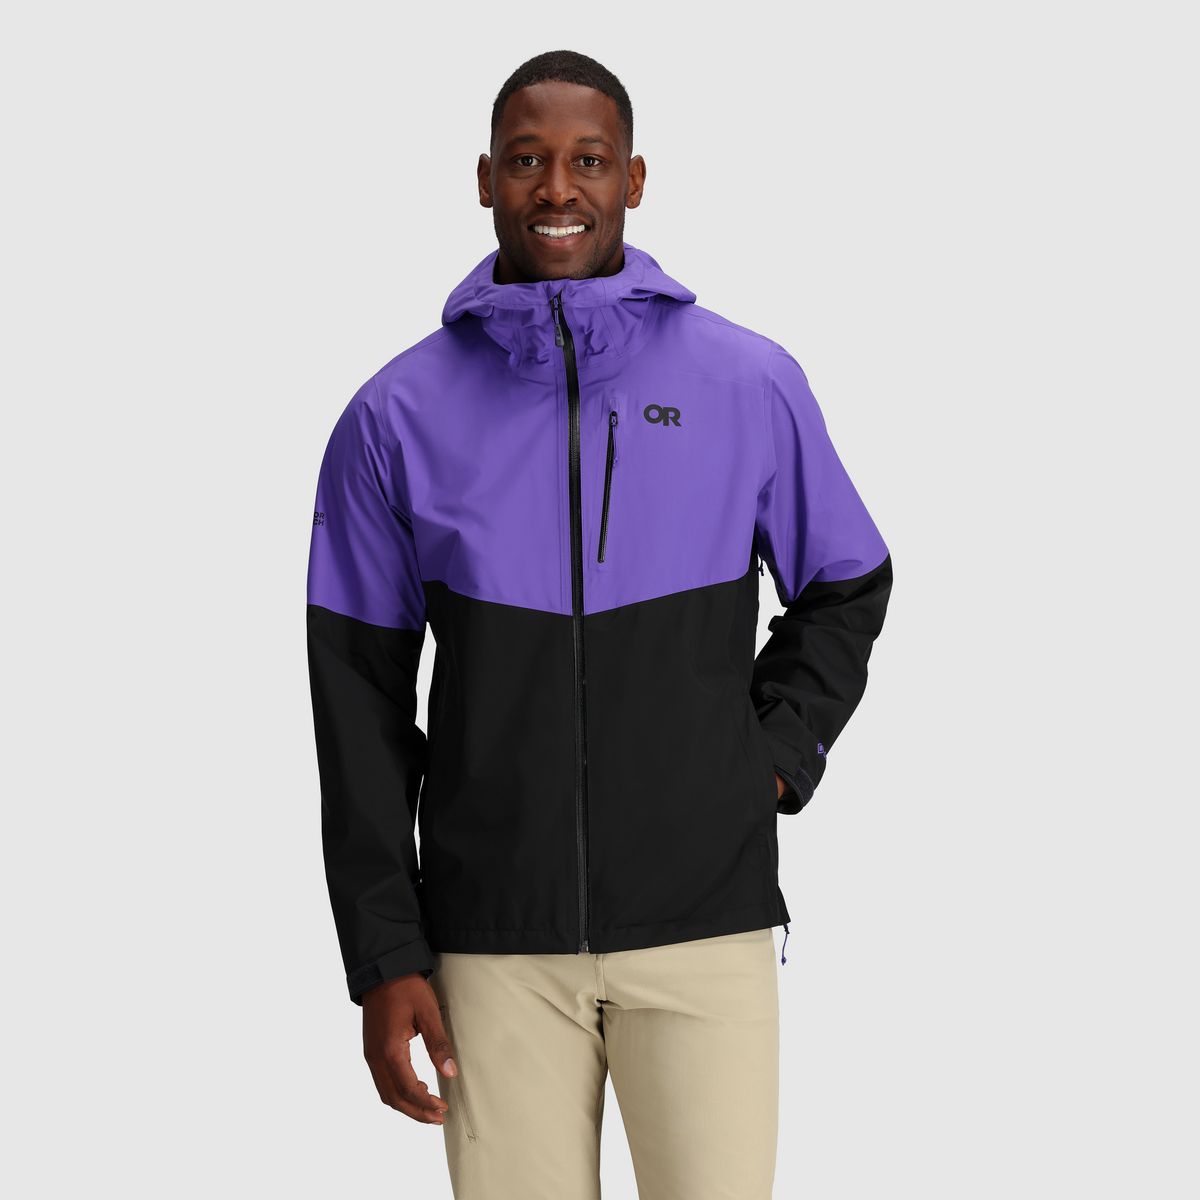 Unlock Wilderness' choice in the Outdoor Research Vs North Face comparison, the Foray II GORE-TEX® Jacket by Outdoor Research